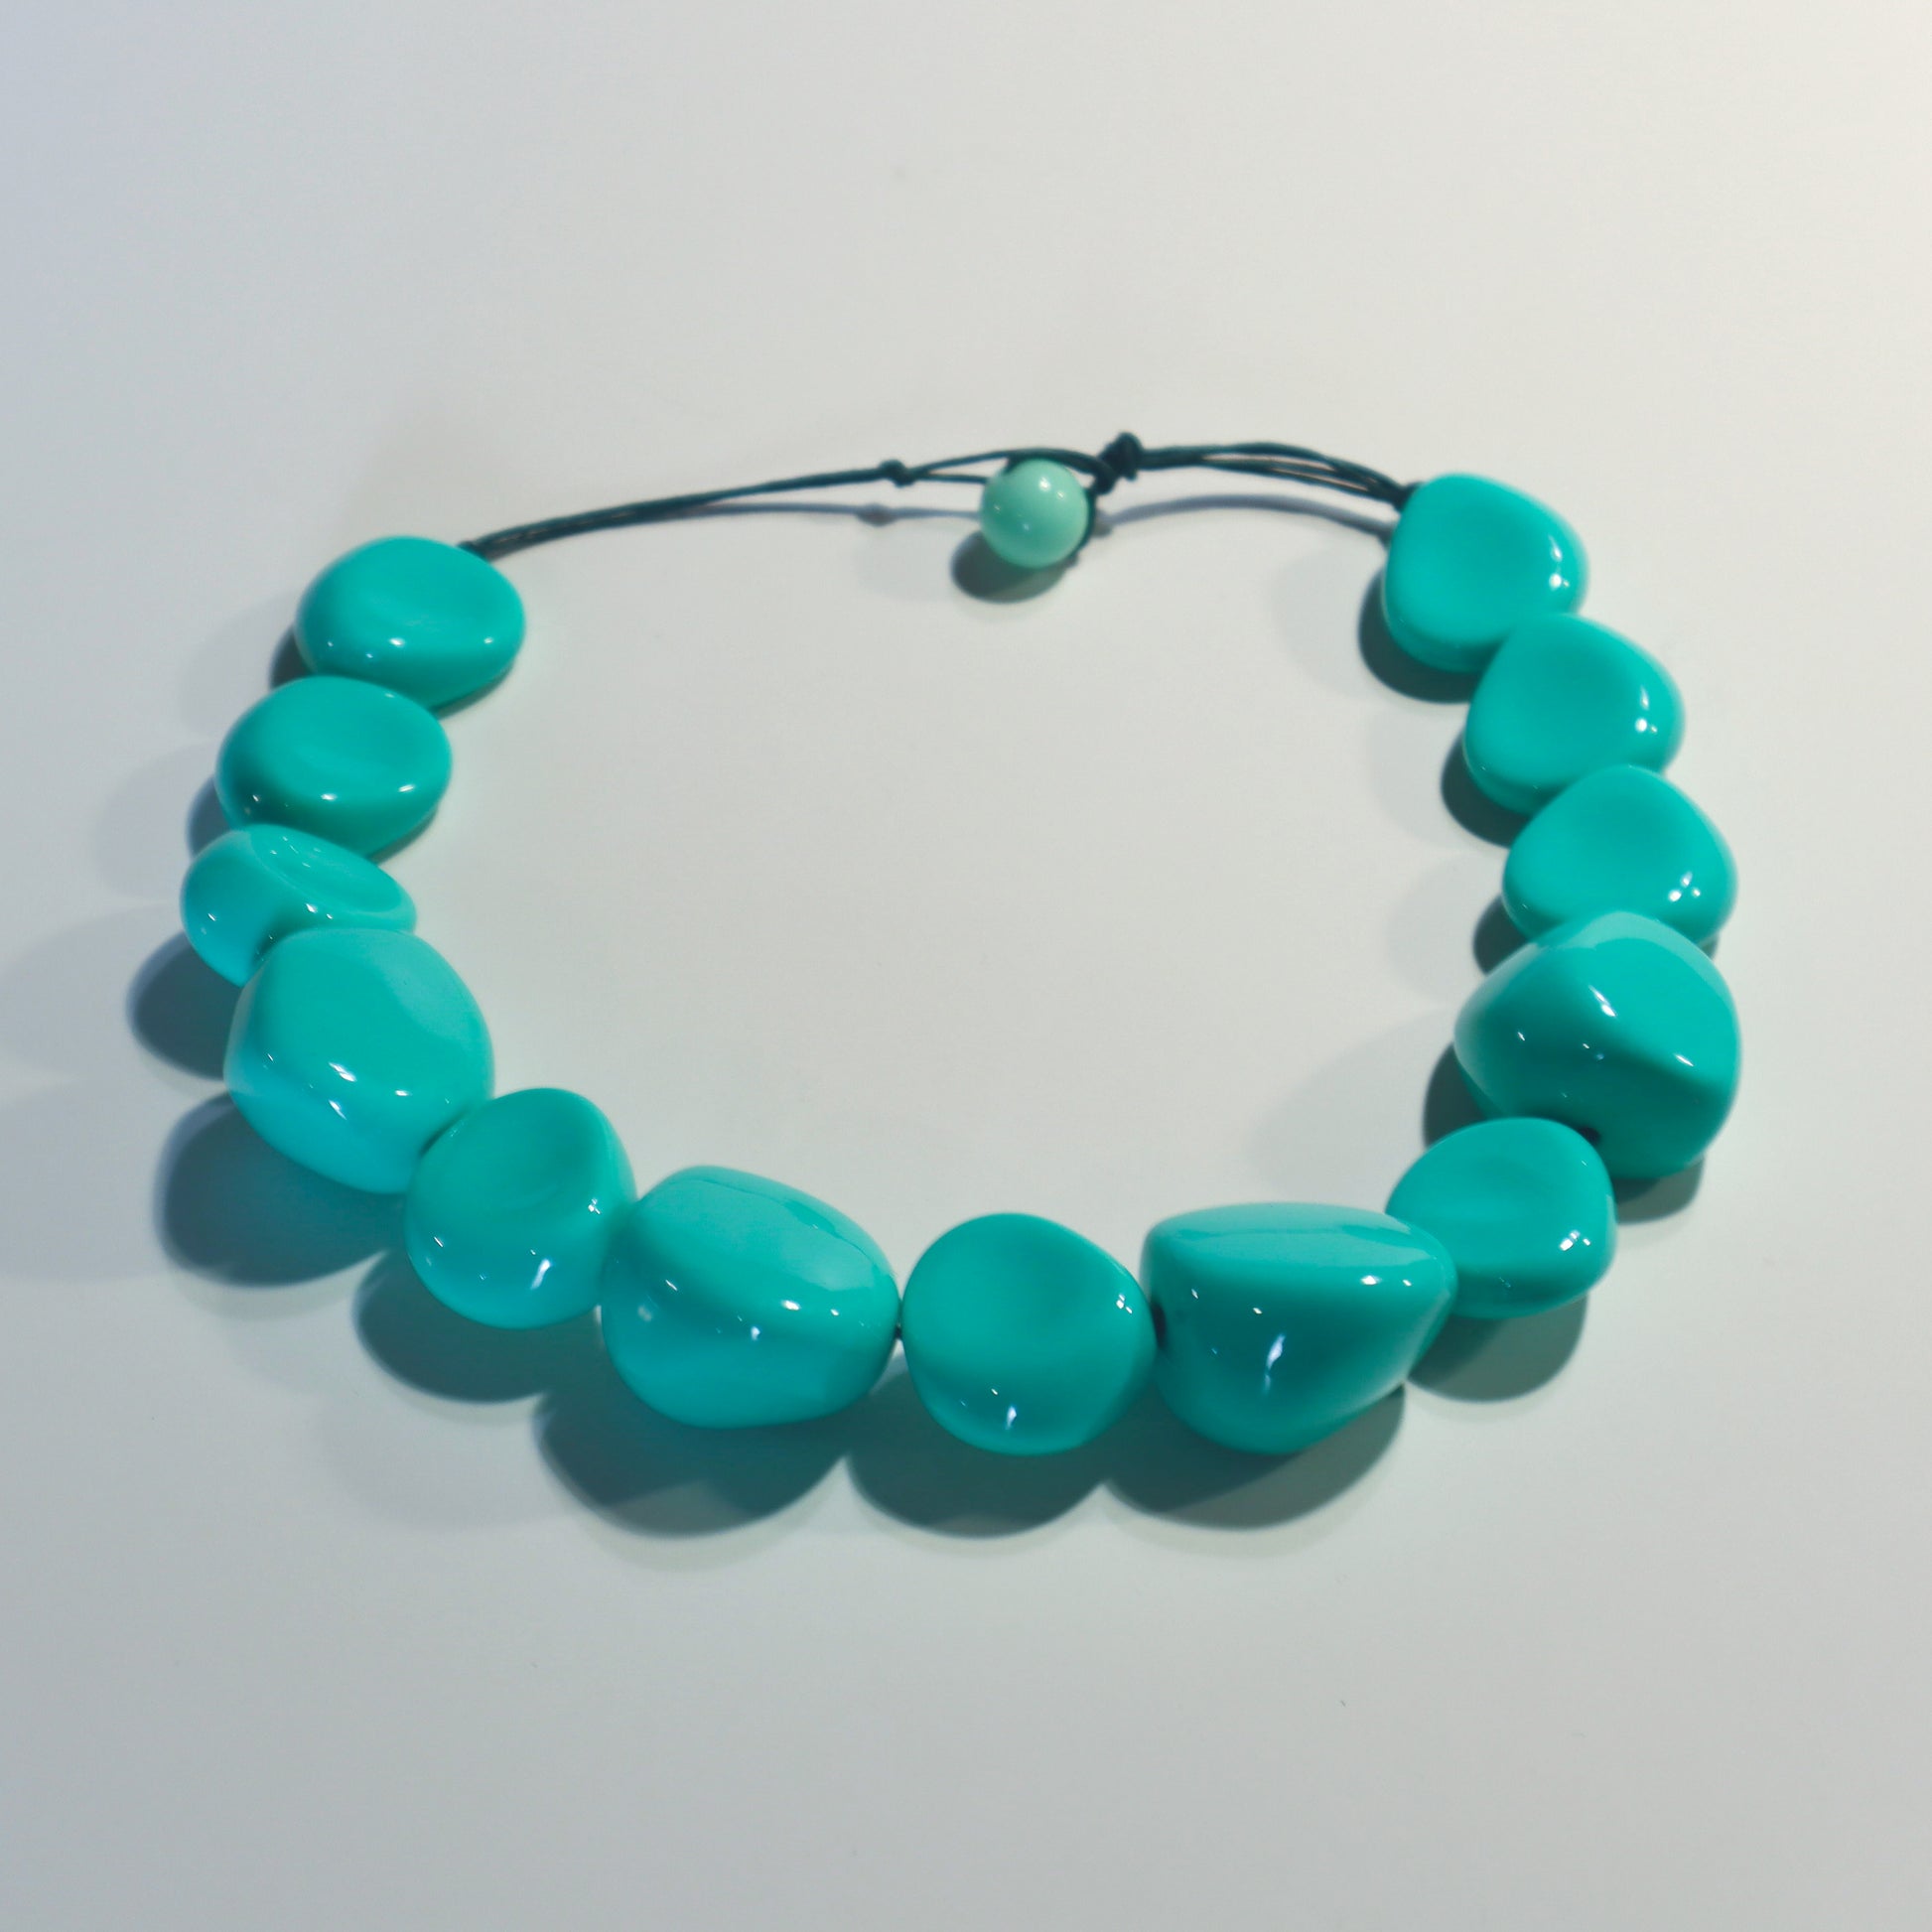 Max Beads Statement Necklace - Mint Green